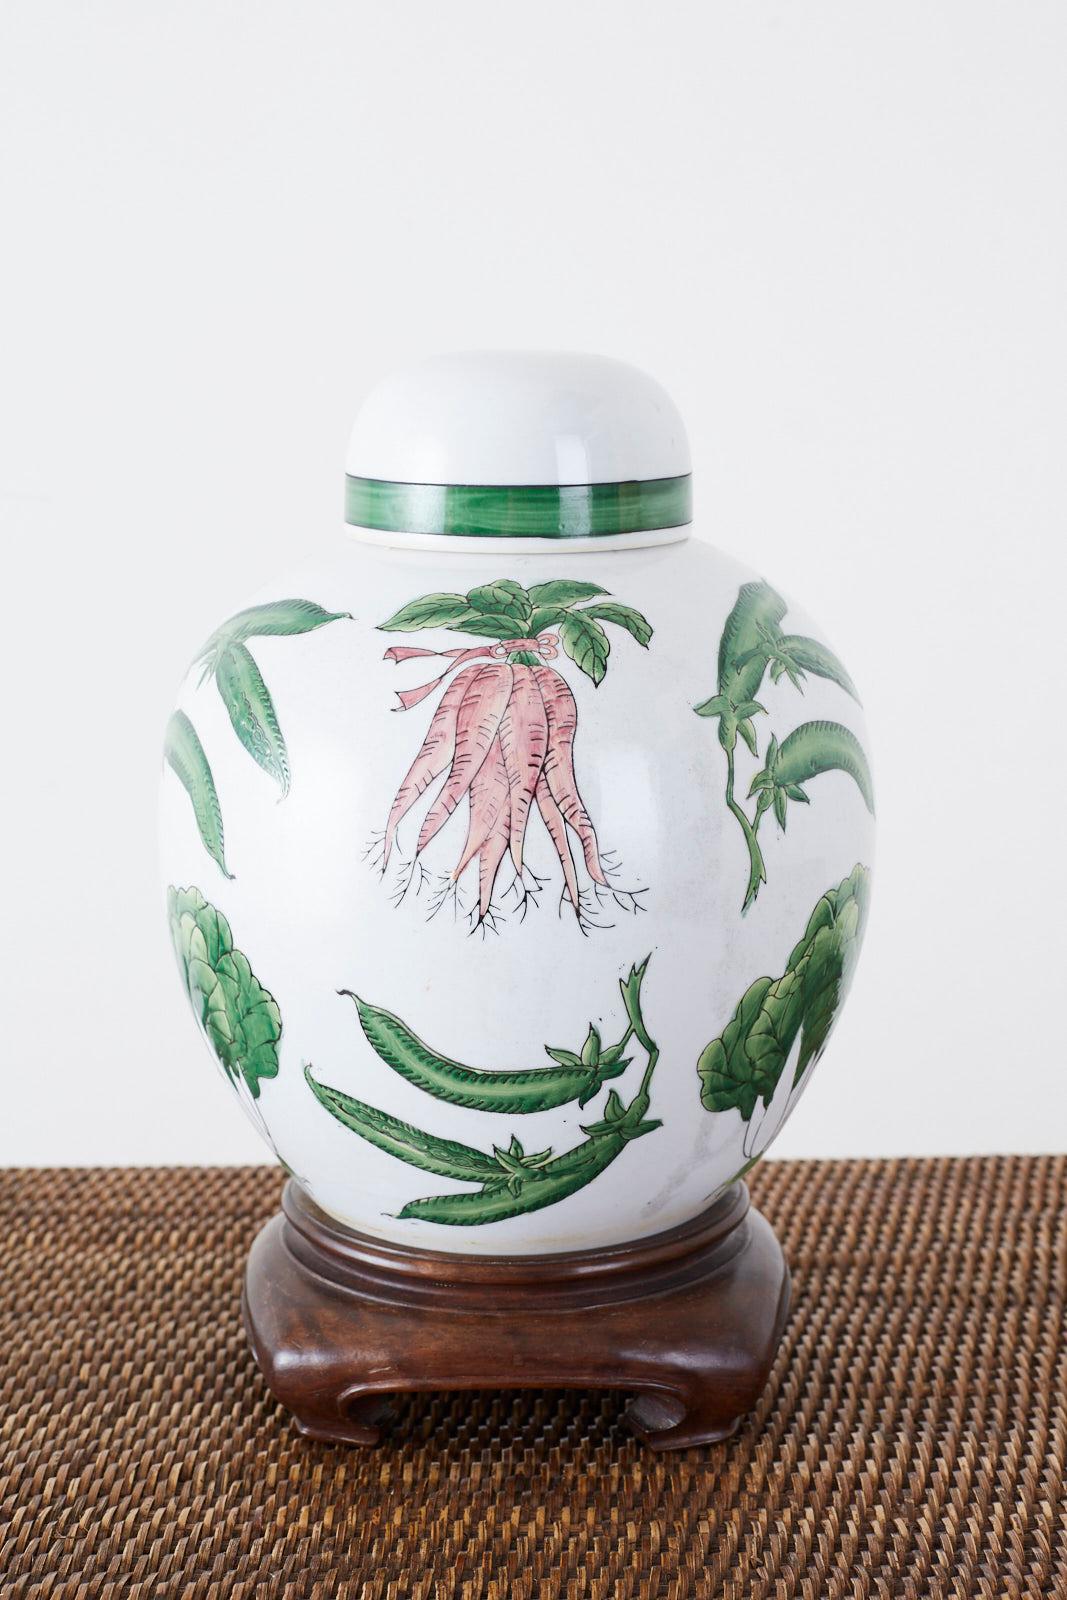 Charming Chinese export porcelain lidded ginger jar on a hardwood stand. Features a highly decorated round form with colorful vegetables over a white ground. The vase with its round lid measures 10 inches high without its stand.